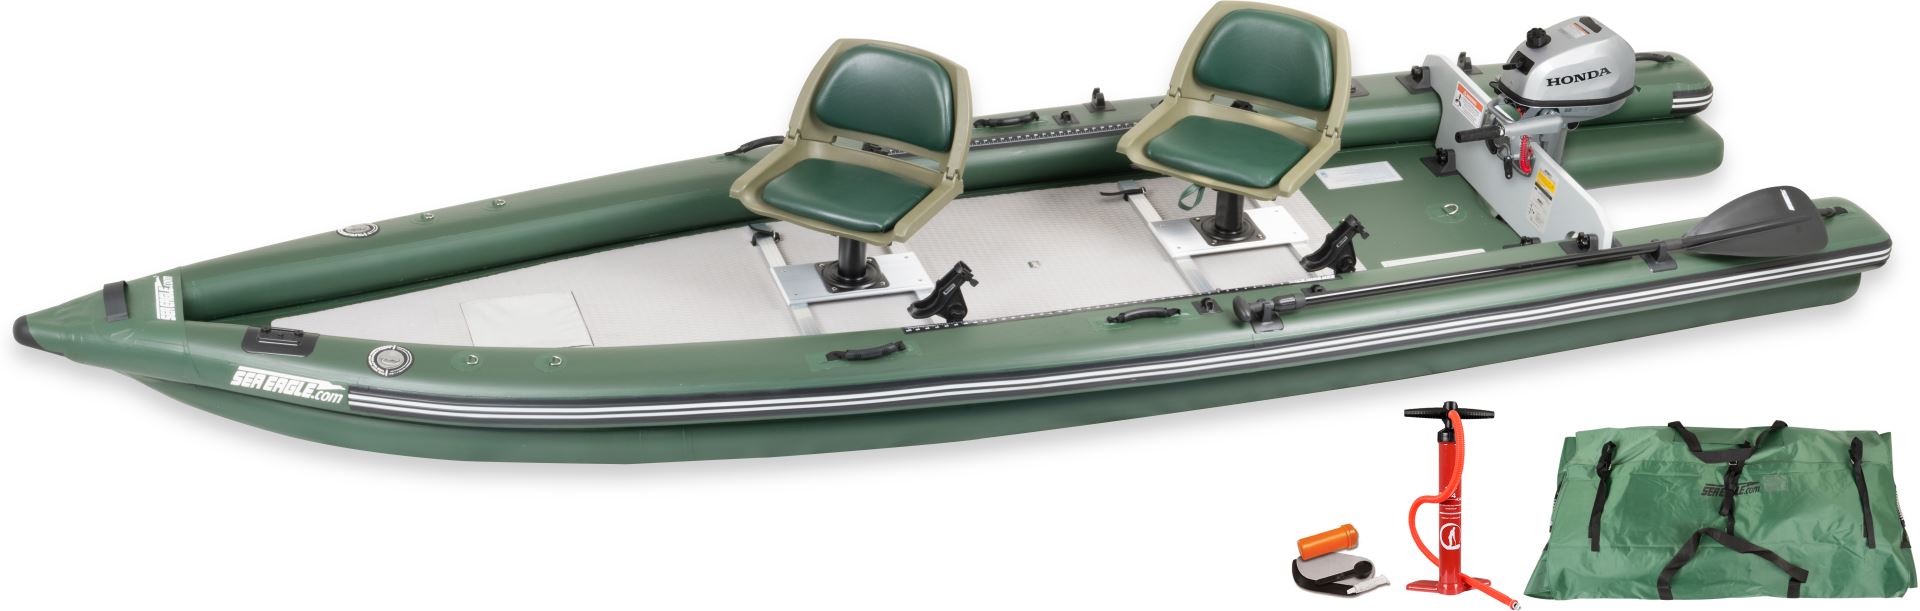 Sea Eagle FSK16 3 person Inflatable Fishing Boat. Package 